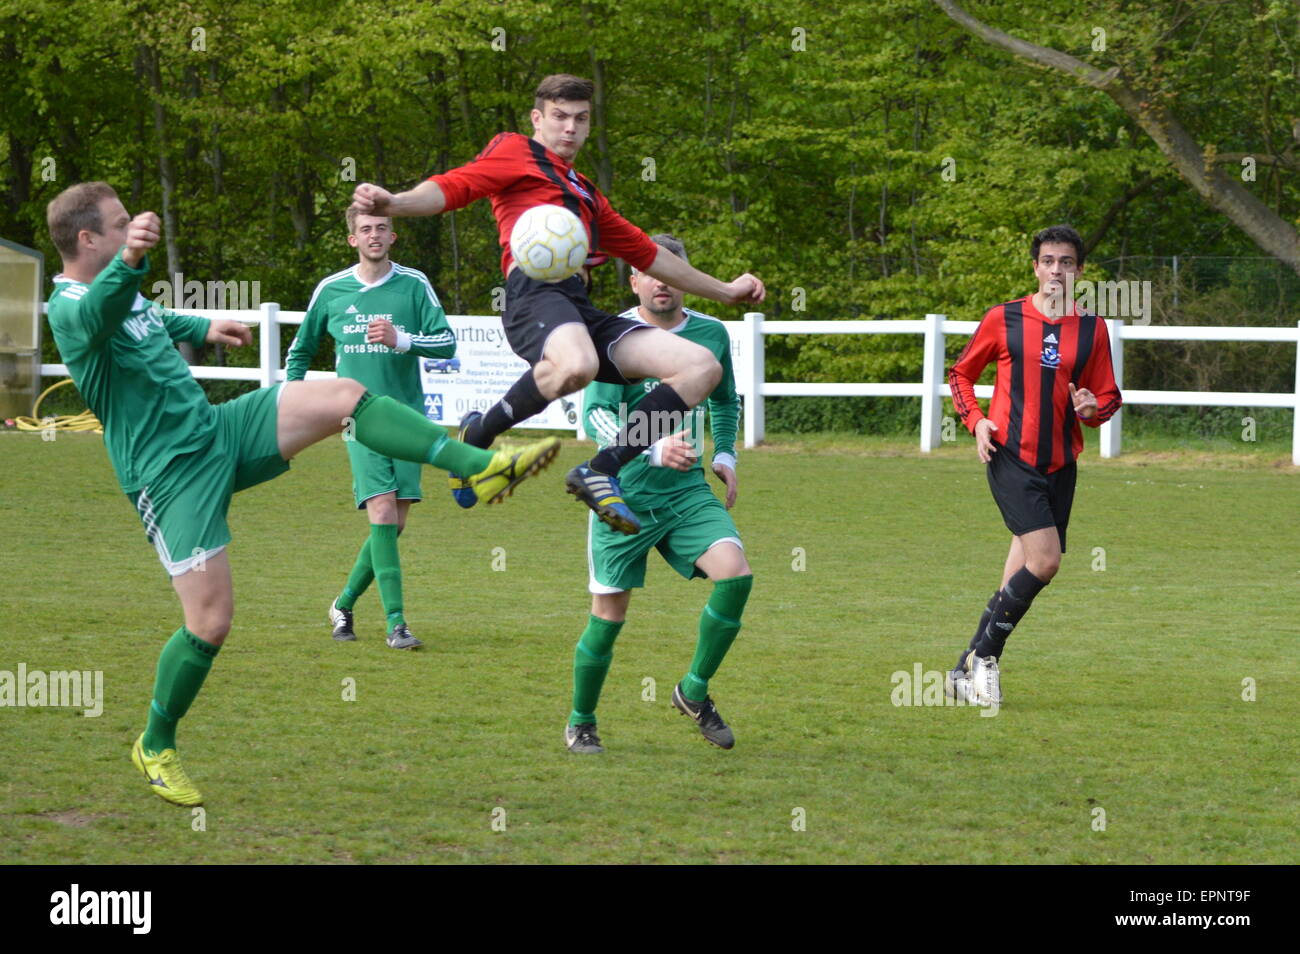 Footballer jumps high to get the ball in a local amateur football match Stock Photo